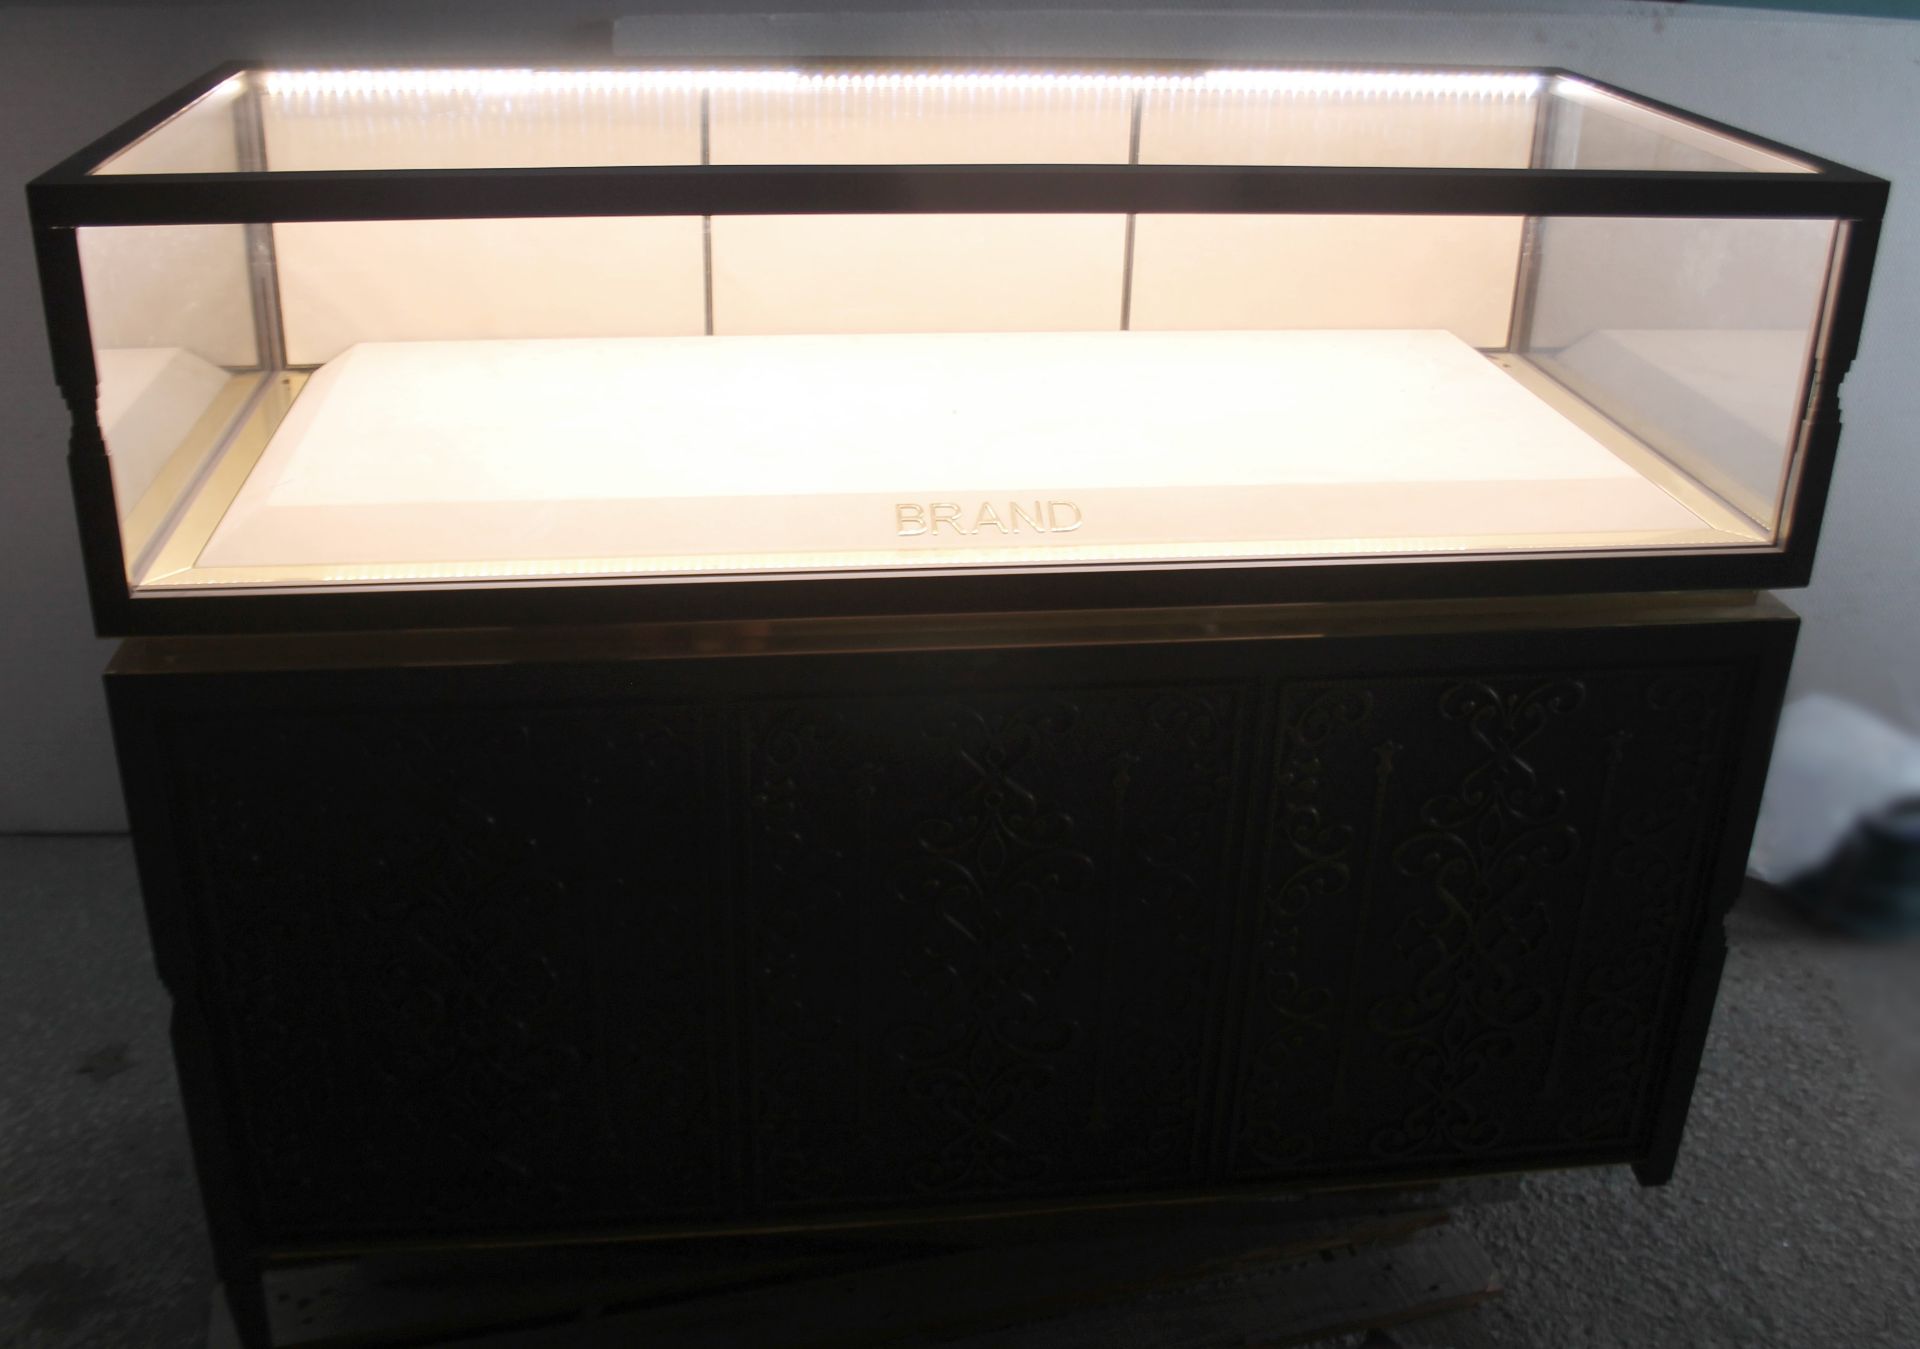 1 x Commercial 3-Door Retail Counter / Illuminated Display Case With A Gun Metal Finish - Ex-Display - Image 12 of 18